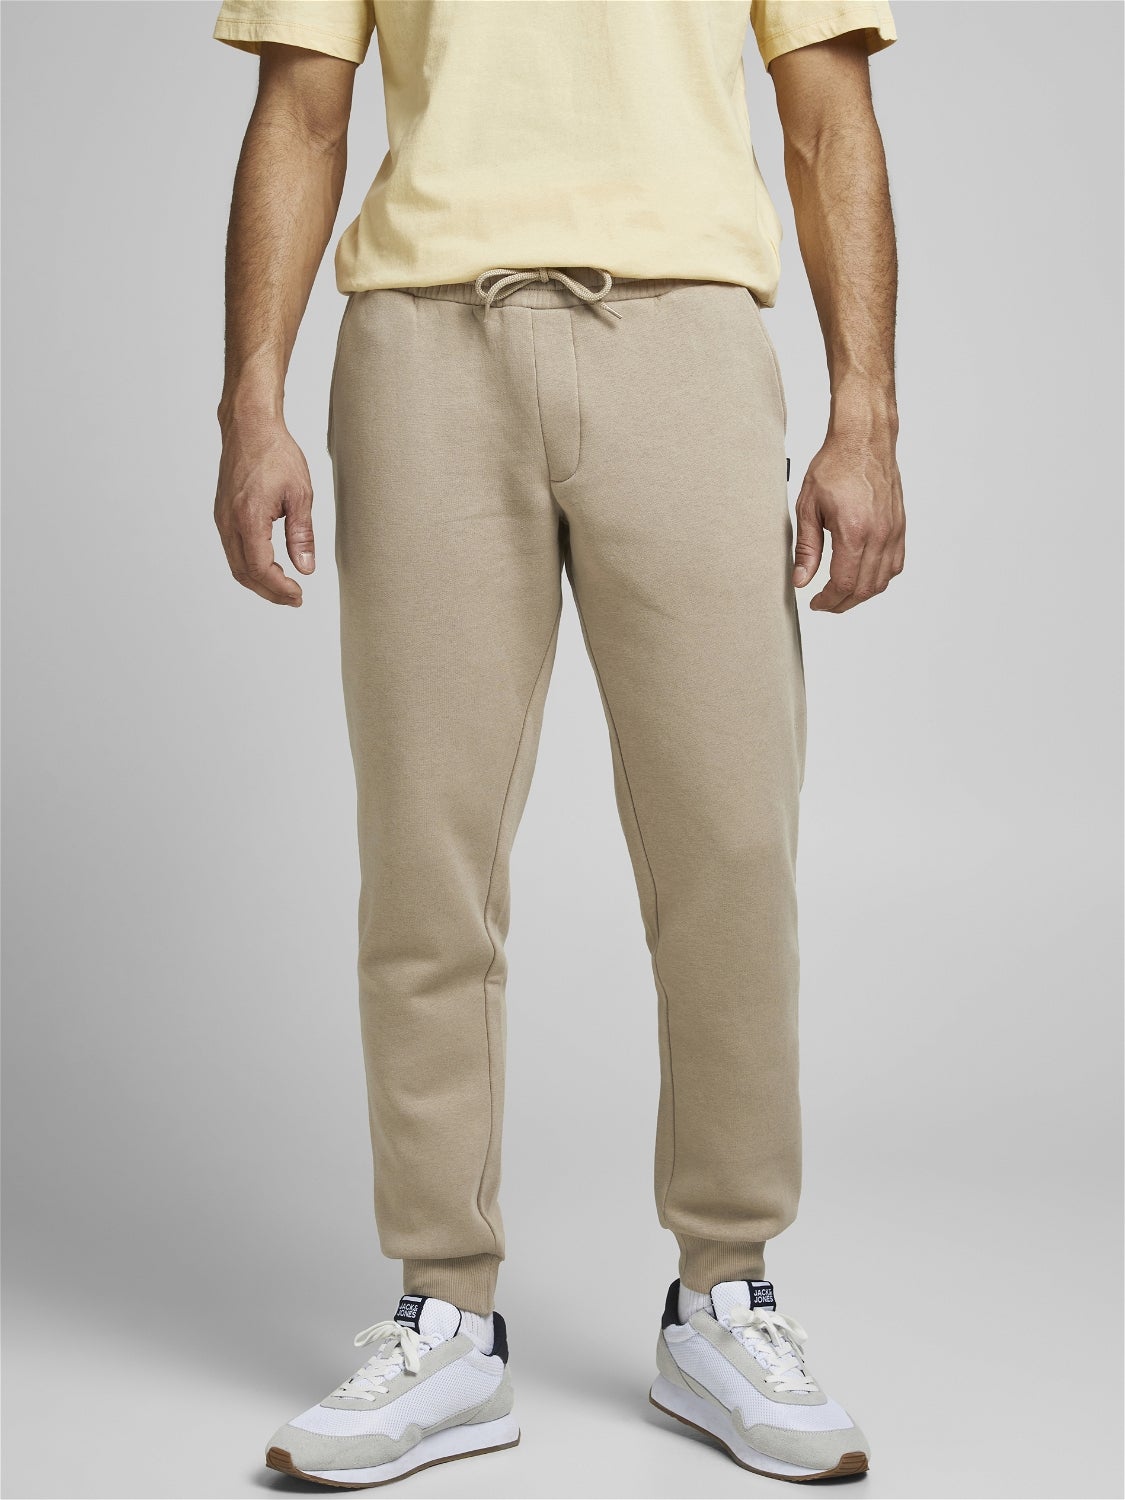 discount 64% Jack & Jones tracksuit and joggers Brown M MEN FASHION Trousers Sports 